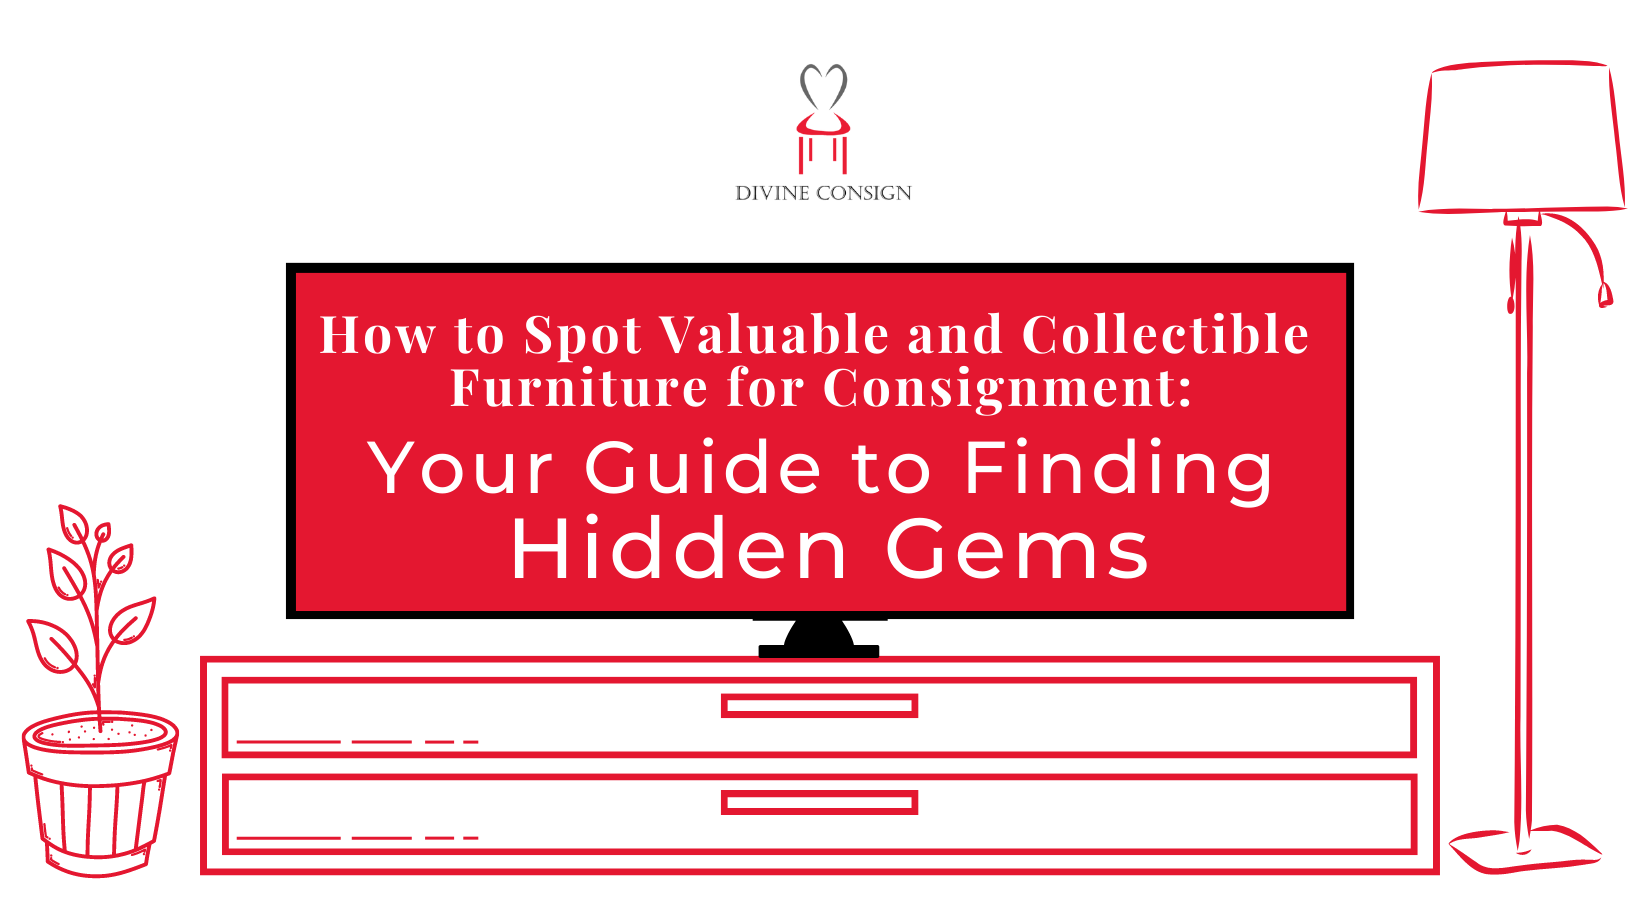 How to Spot Valuable and Collectible Furniture for Consignment: Your Guide to Finding Hidden Gems